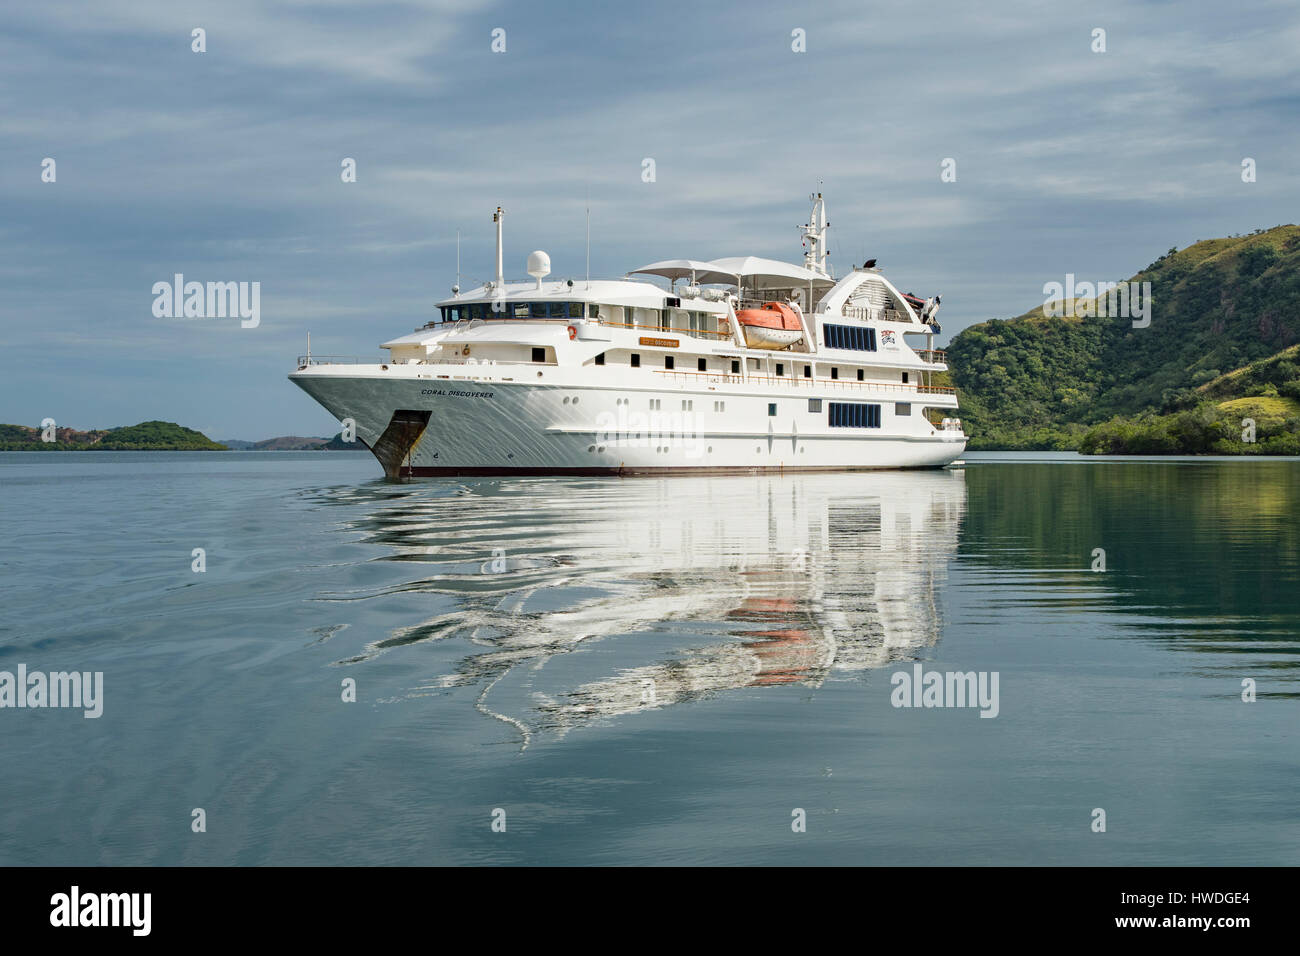 Coral Discoverer at Rinca Island, Indonesia Stock Photo